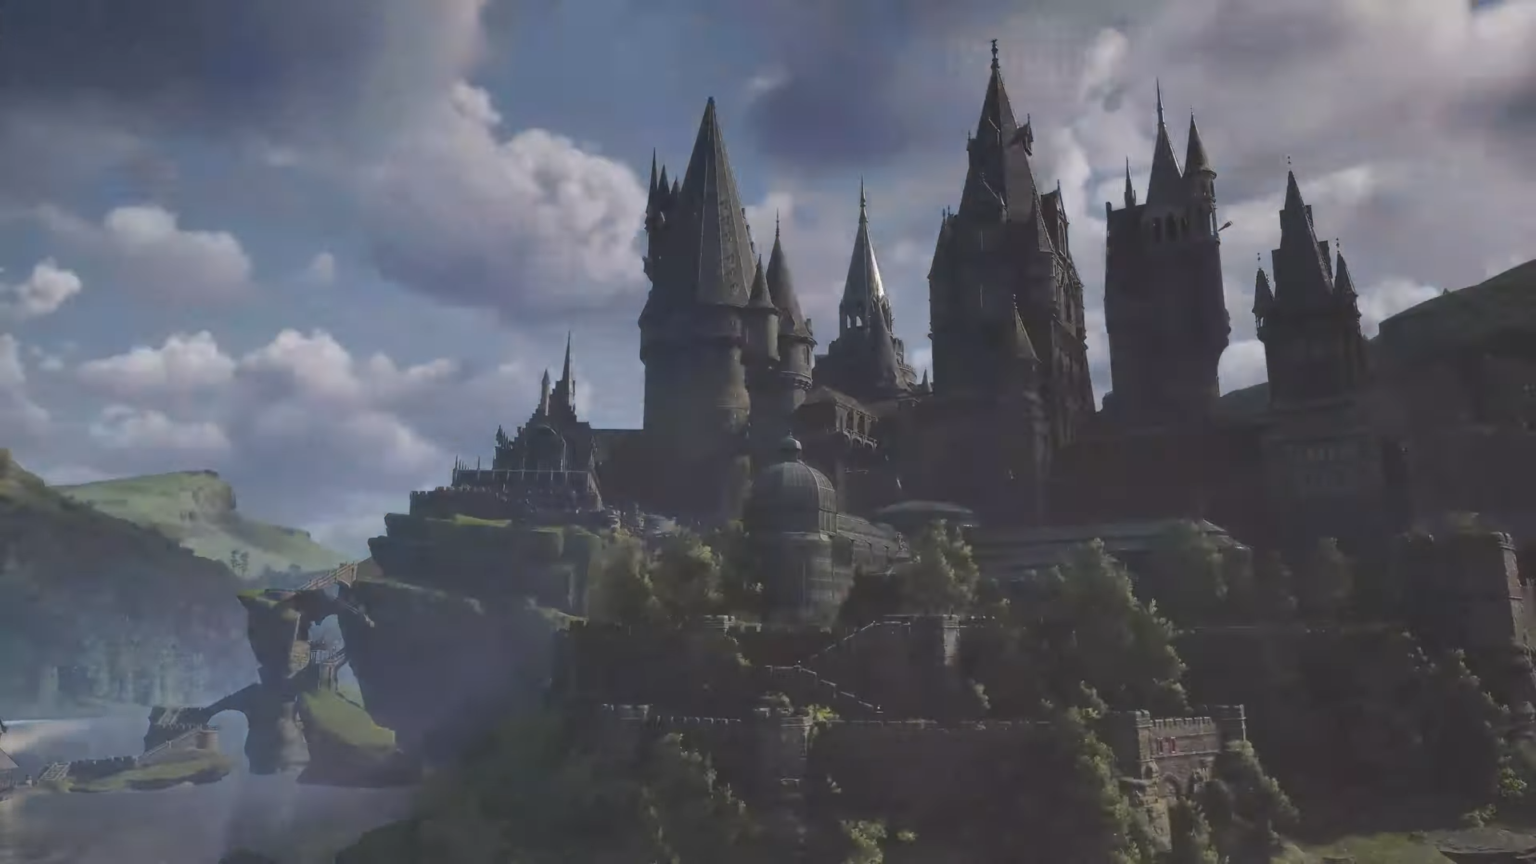 why is hogwarts legacy delayed for switch